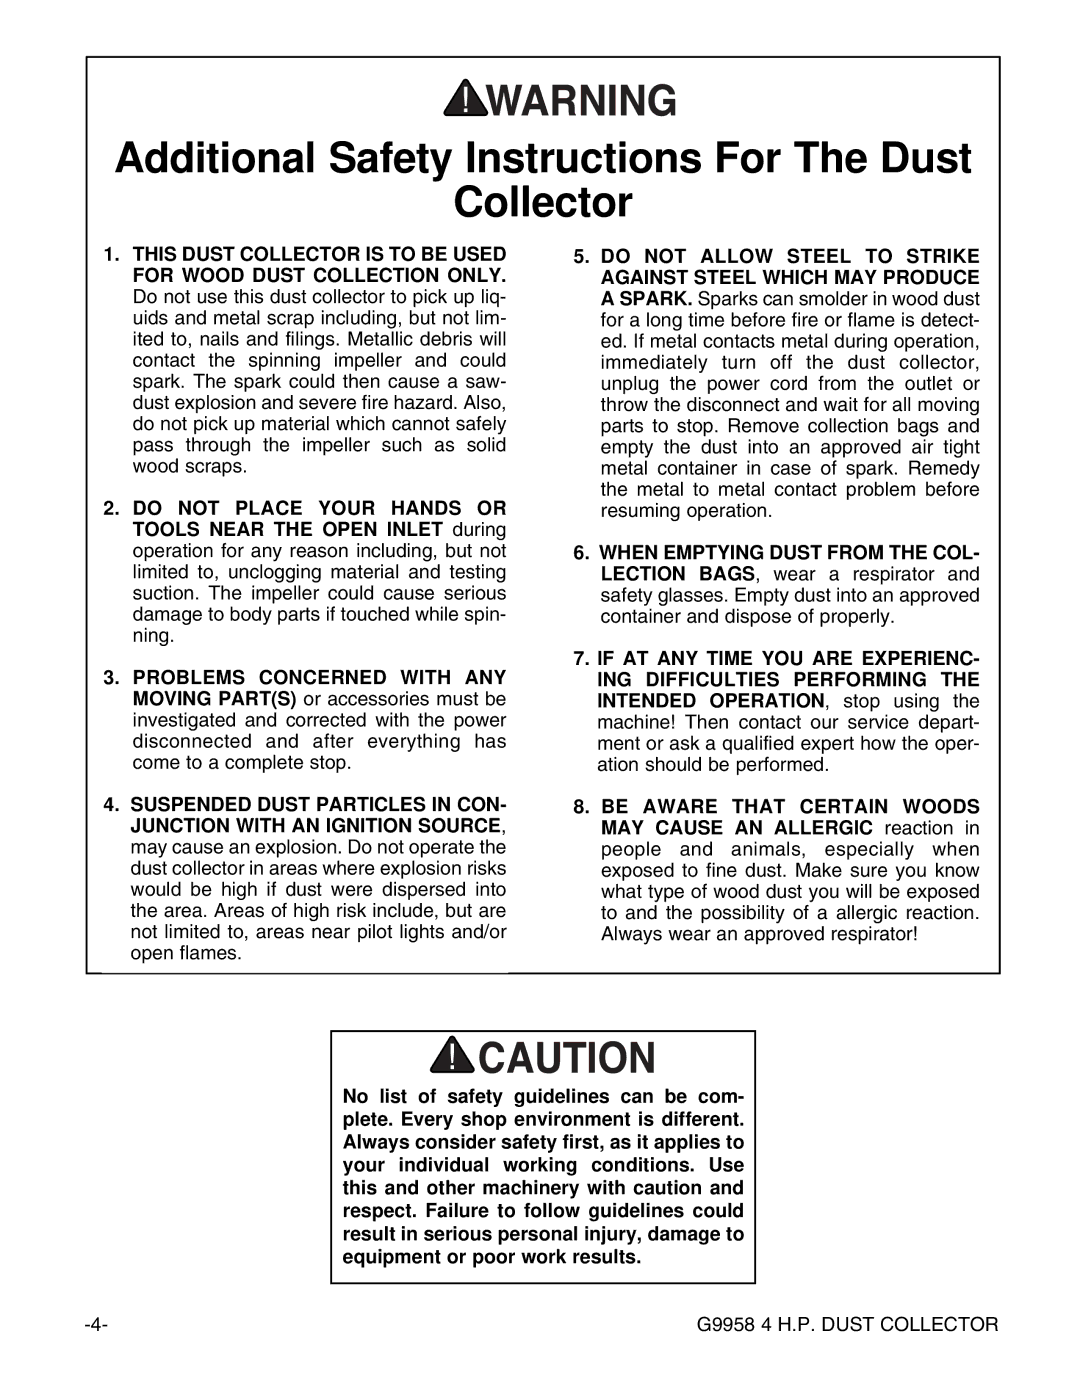 Grizzly G9958 instruction manual Additional Safety Instructions For The Dust Collector 